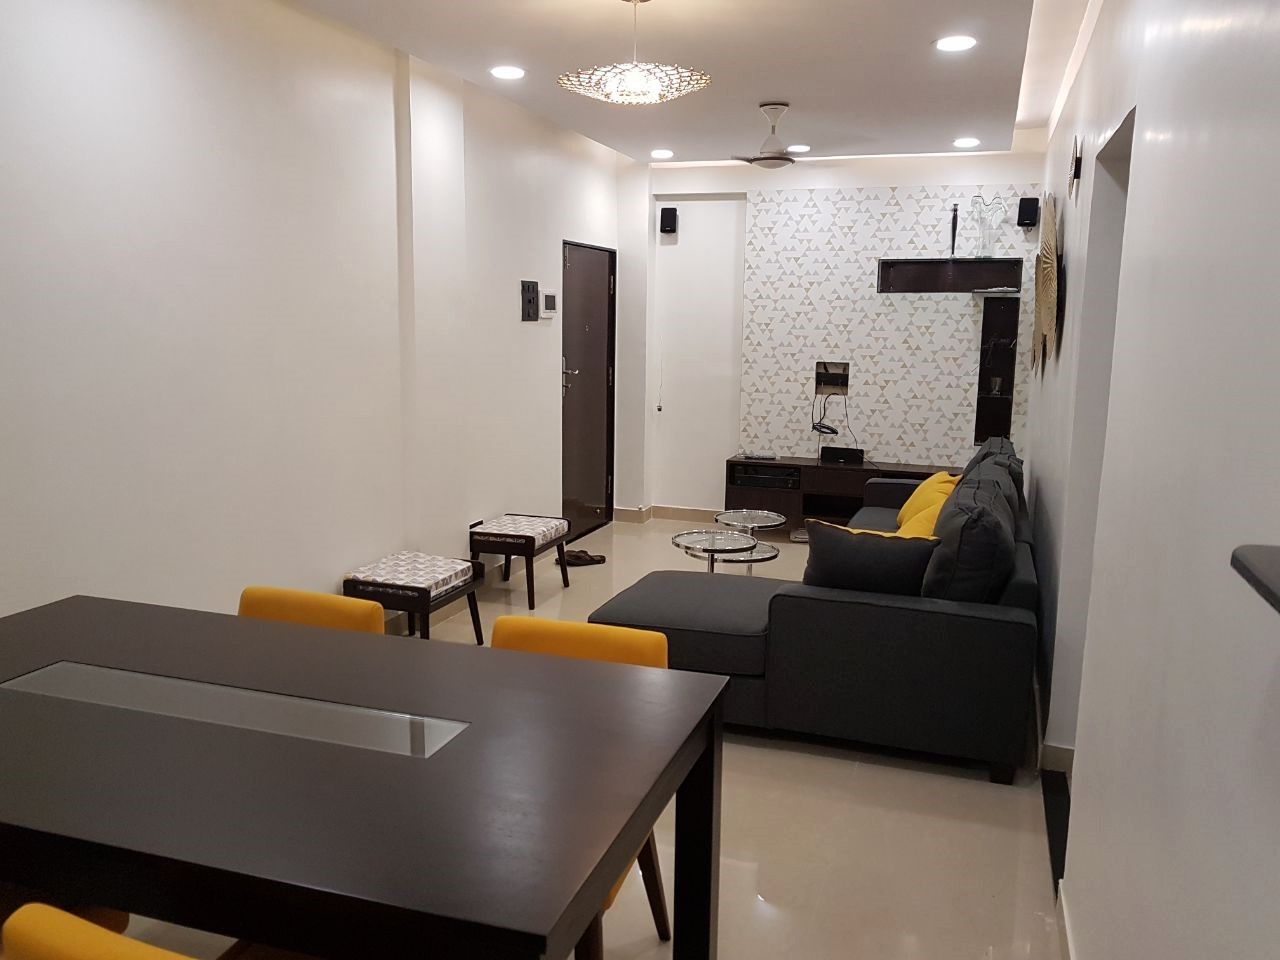 andheri west 2 bhk, The Red Brick Wall The Red Brick Wall Moderne Wohnzimmer